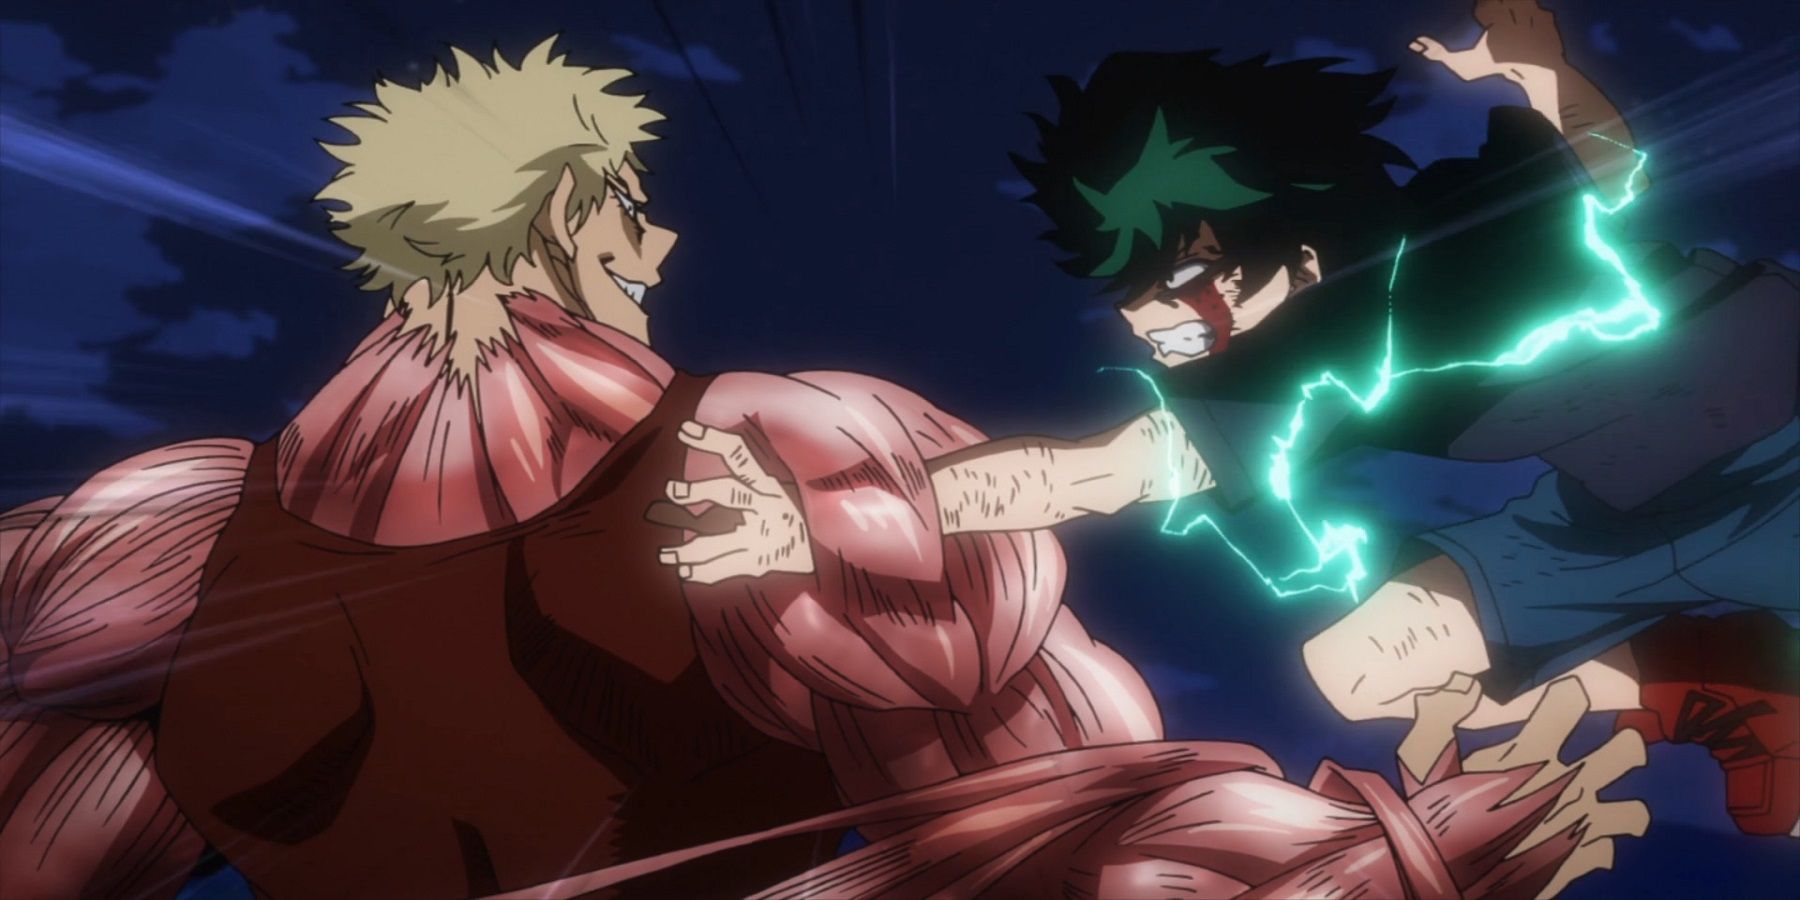 Deku about to punch Muscular from My Hero Academia.